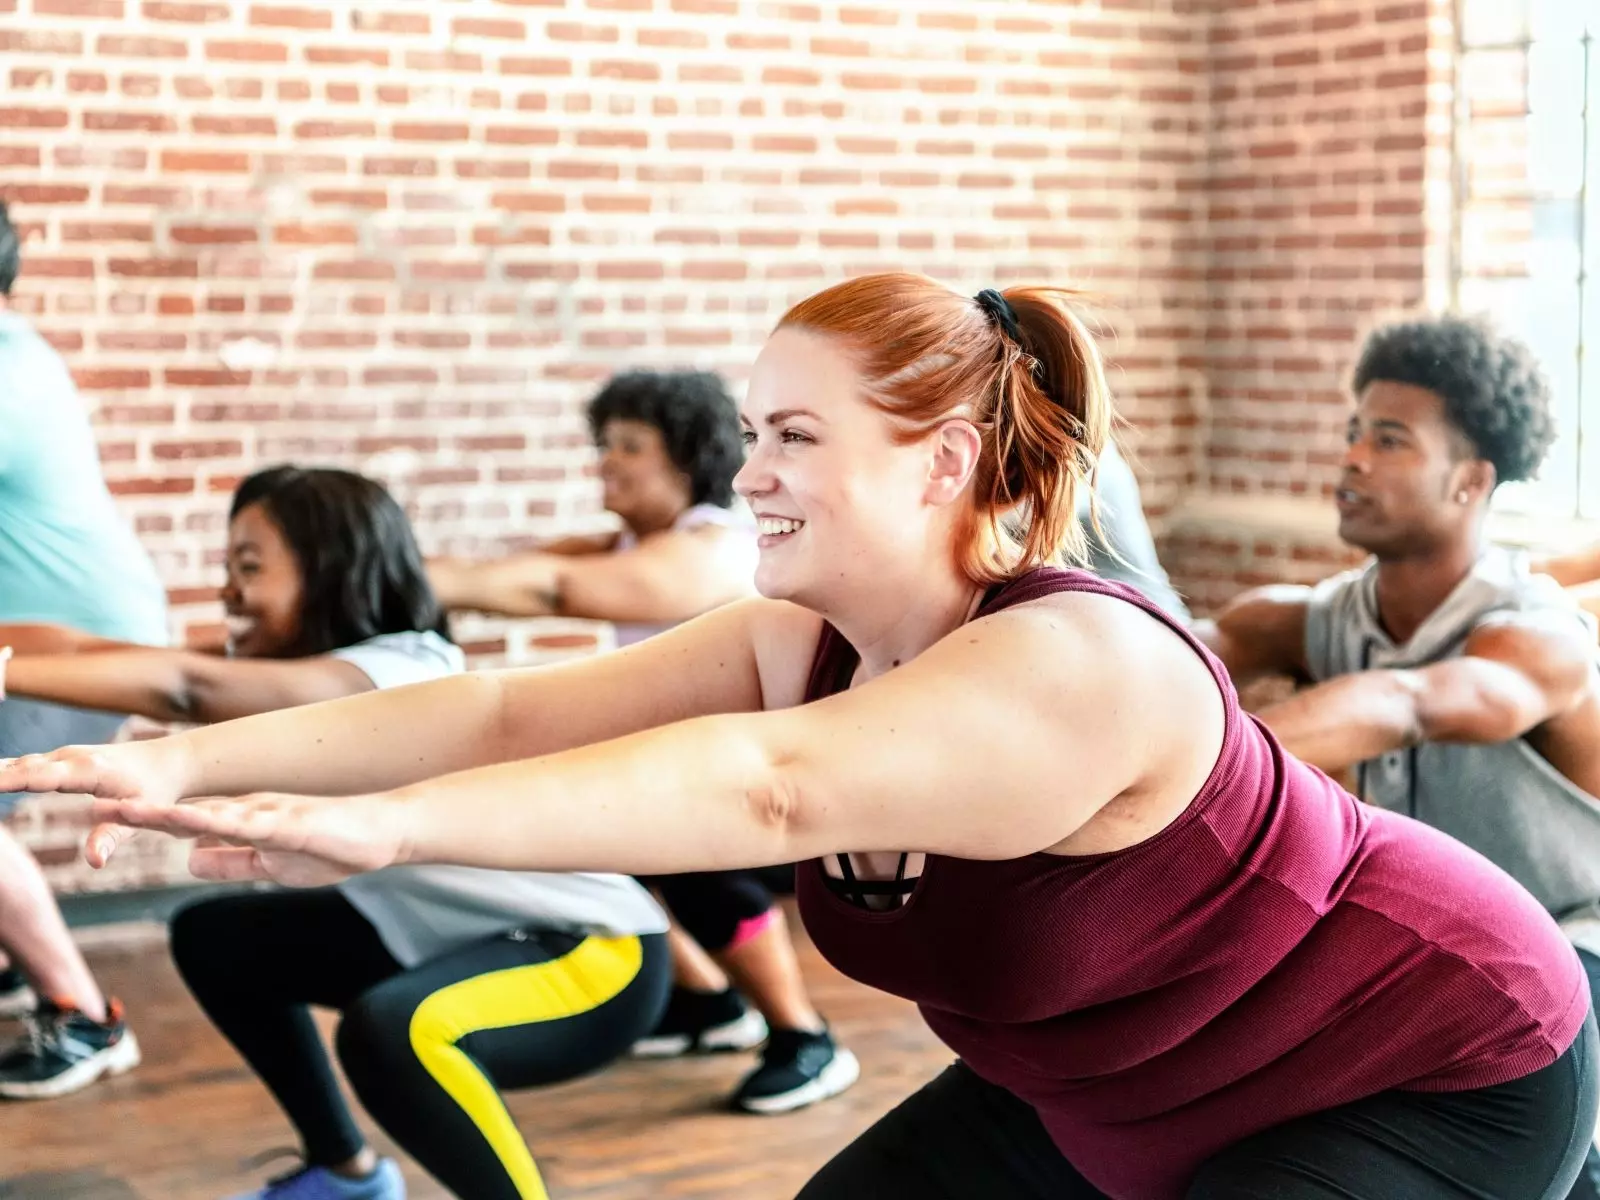 Find your fitness: Exercise is for everyone